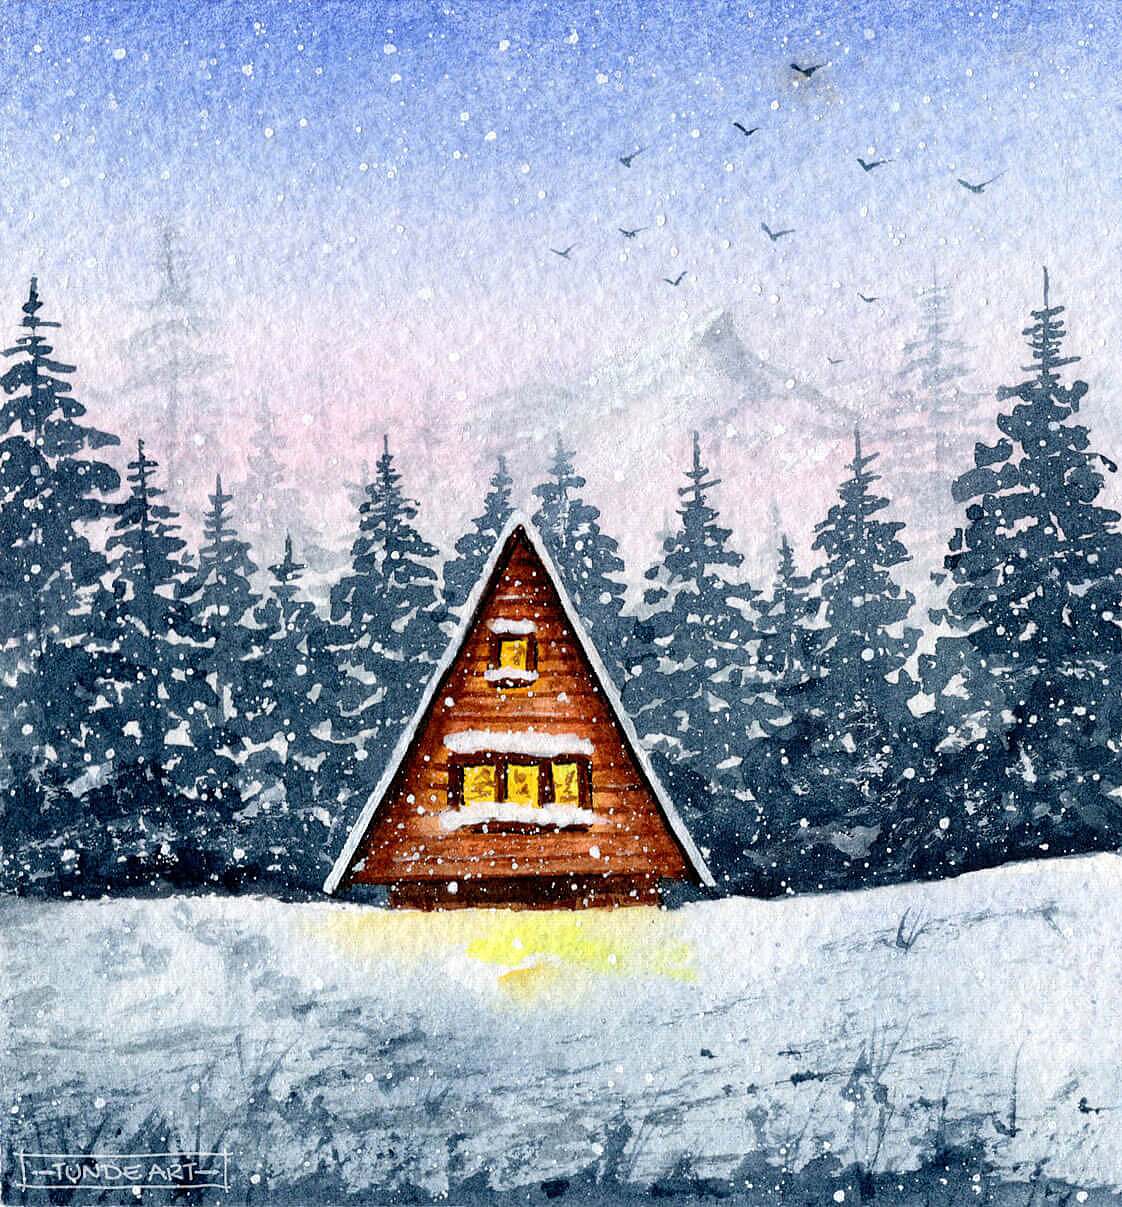 A Frame Cabin in the Woods by Tunde Art